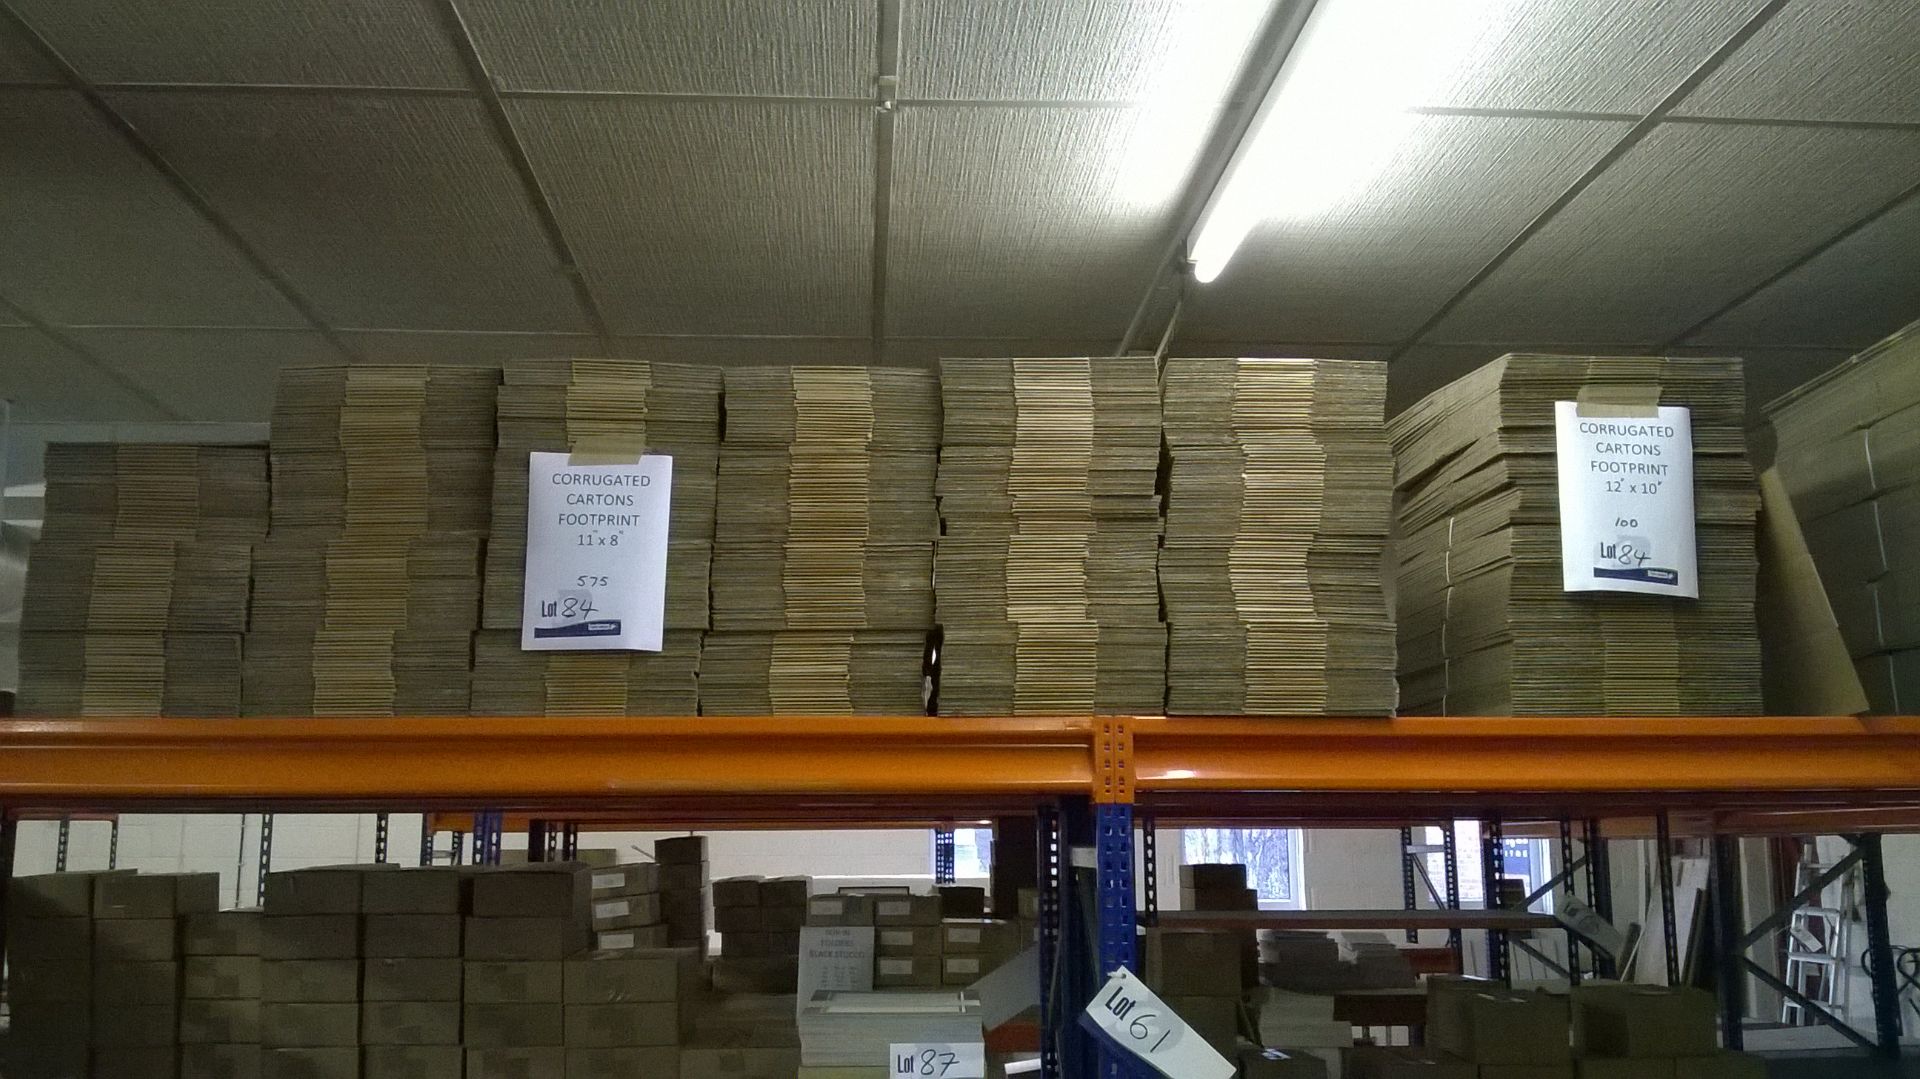 Plain Corrugated Cartons Comprising: 575 – 11inch x 8inch Footprint, 100 – 12inch x 10inch